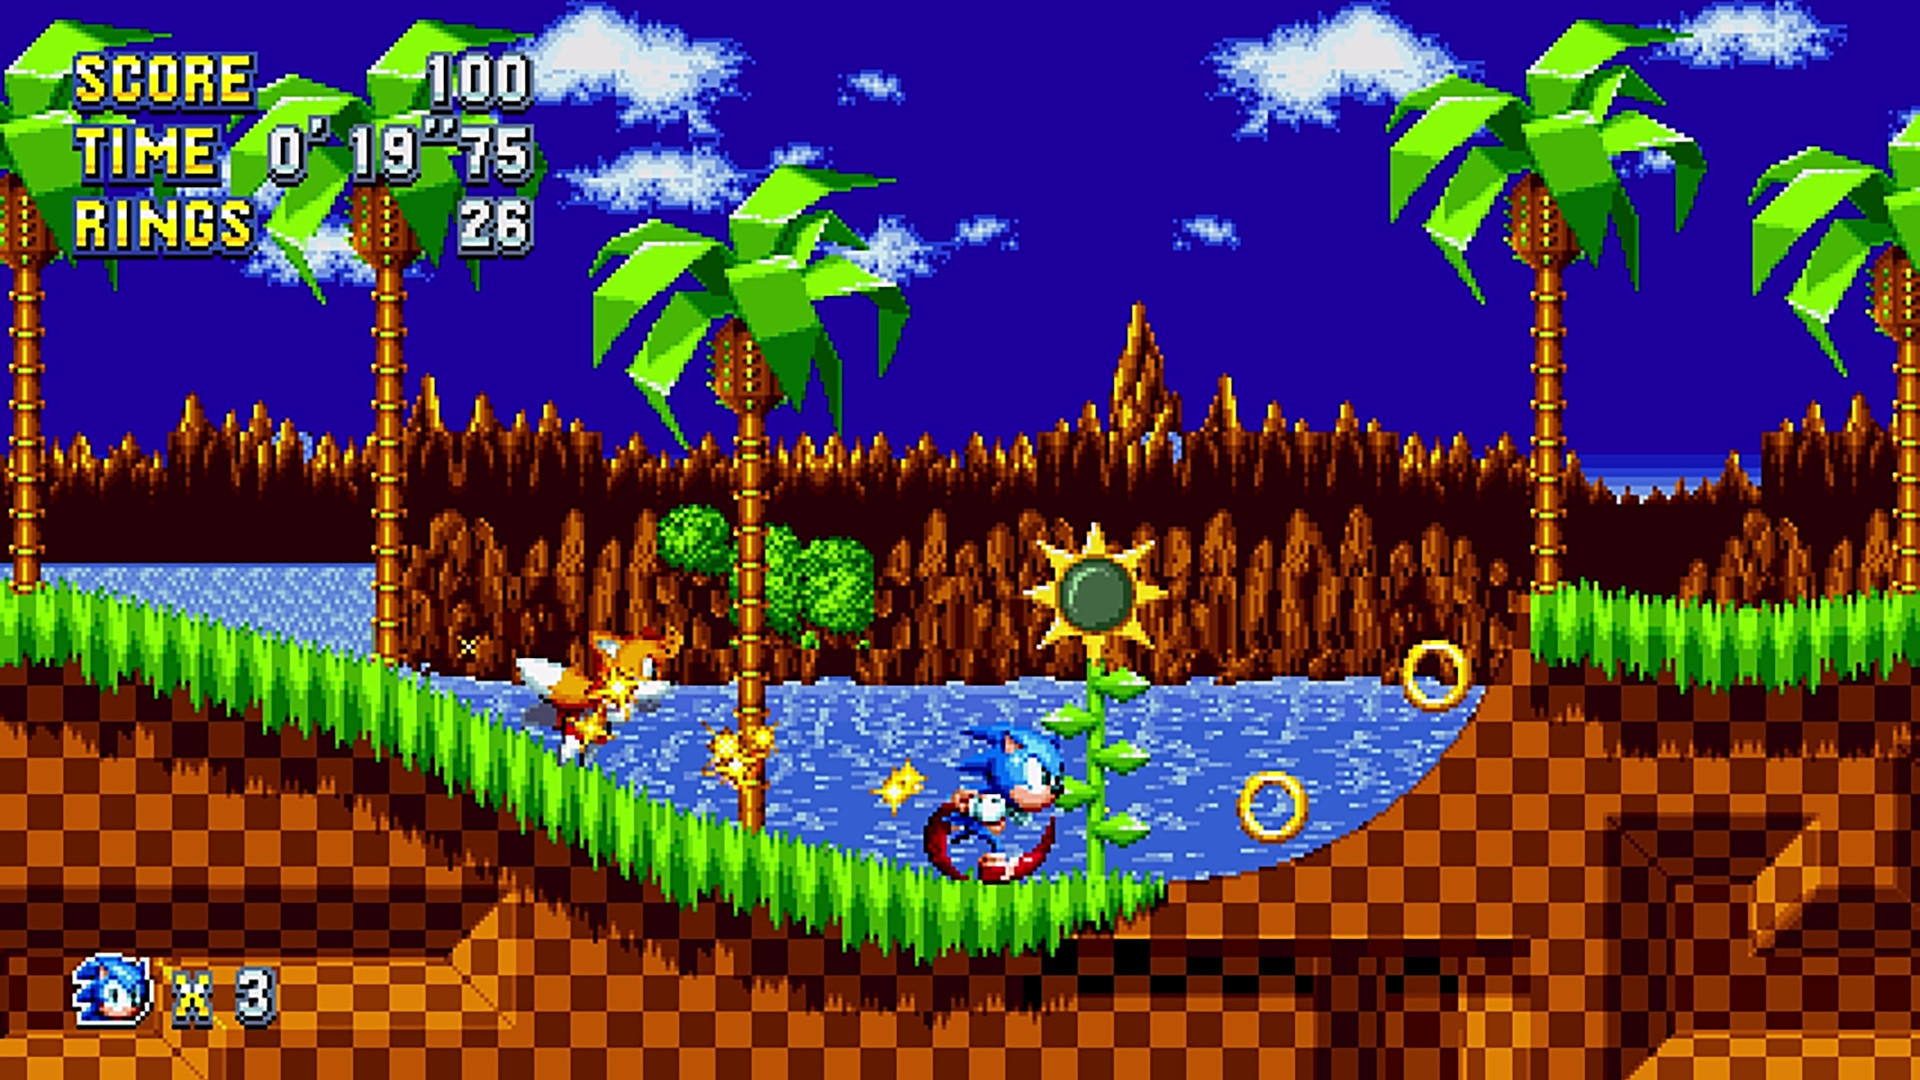 Sonic The Hedgehog 2 System Requirements - Can I Run It? - PCGameBenchmark